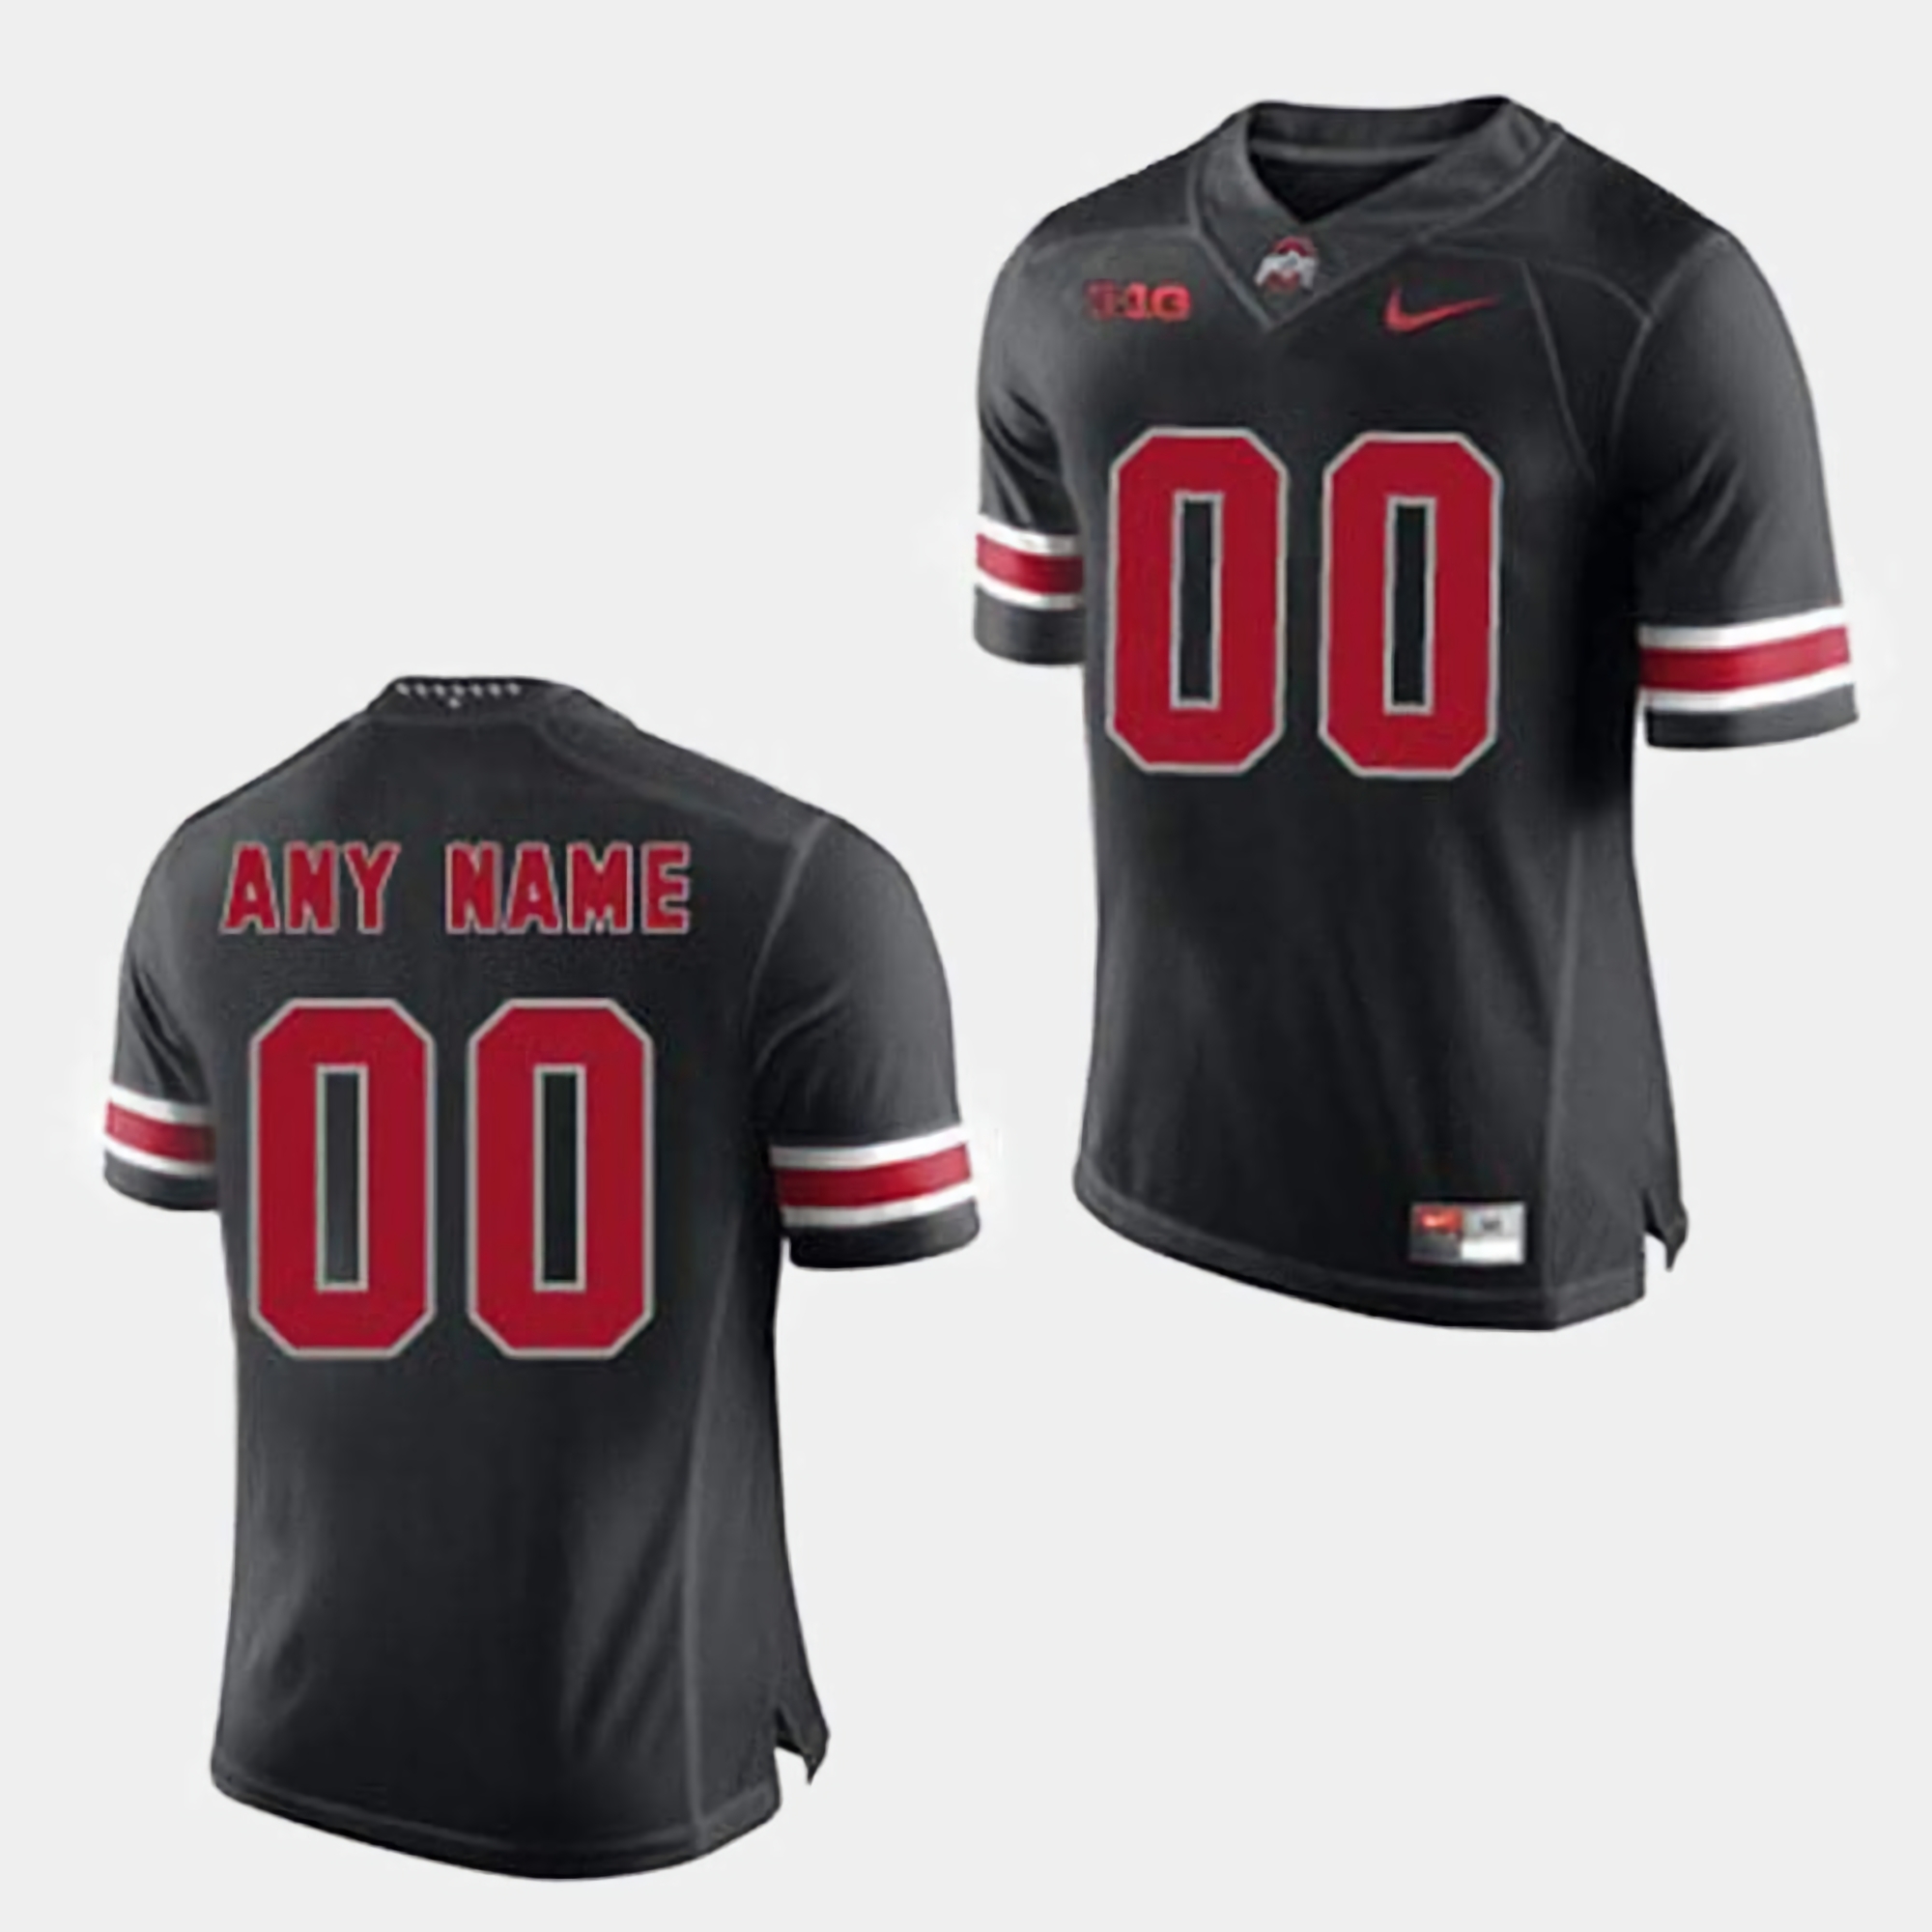 Ohio State Buckeyes Custom Men's #00 Black Authentic Stitched College Football Jersey